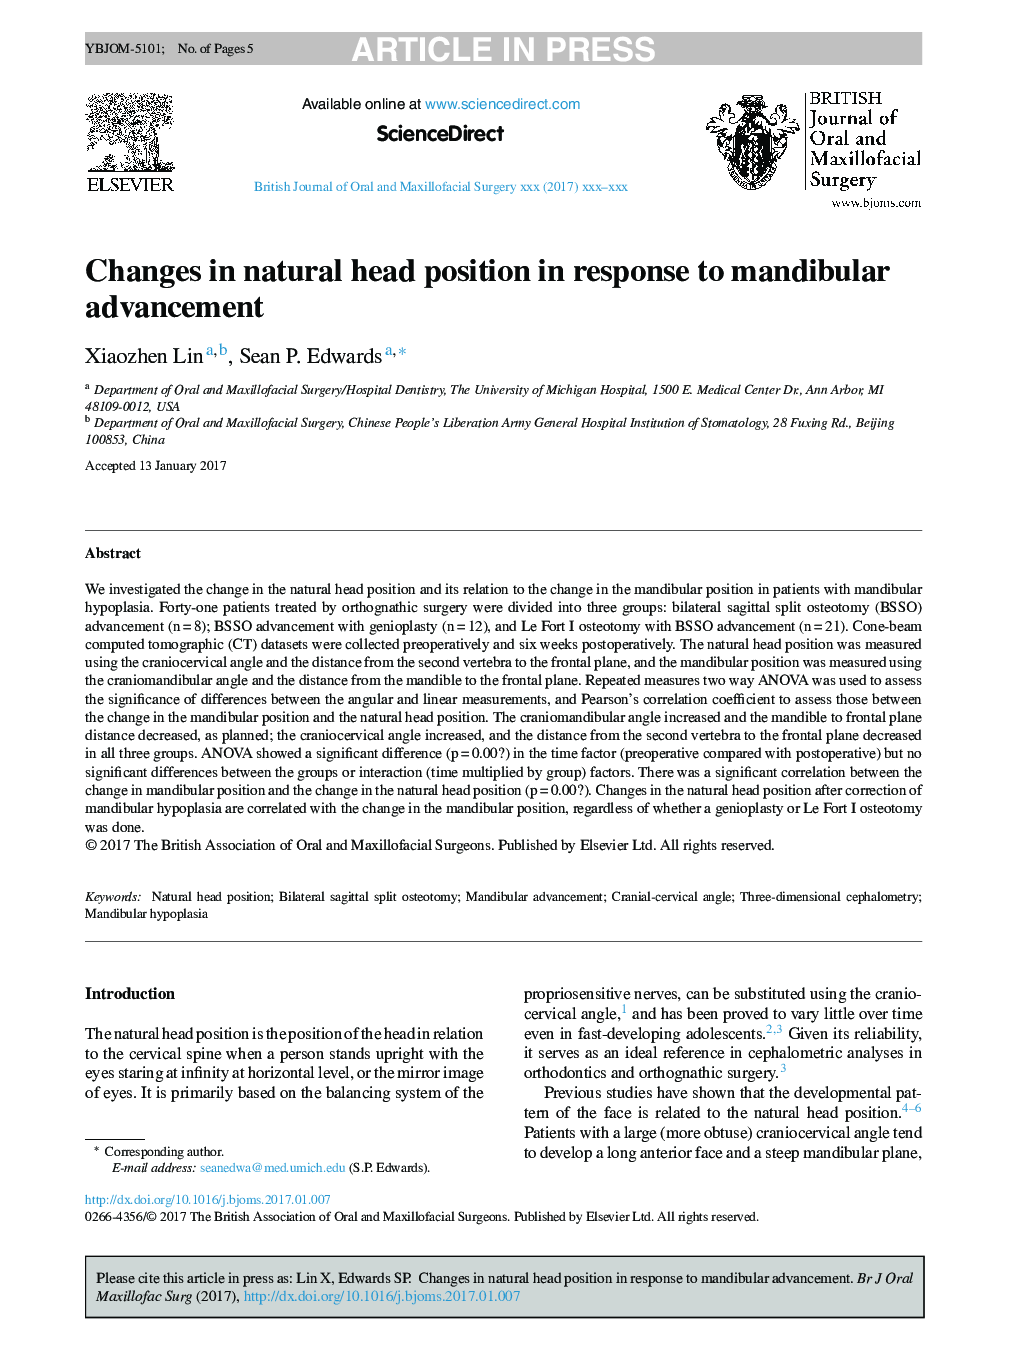 Changes in natural head position in response to mandibular advancement